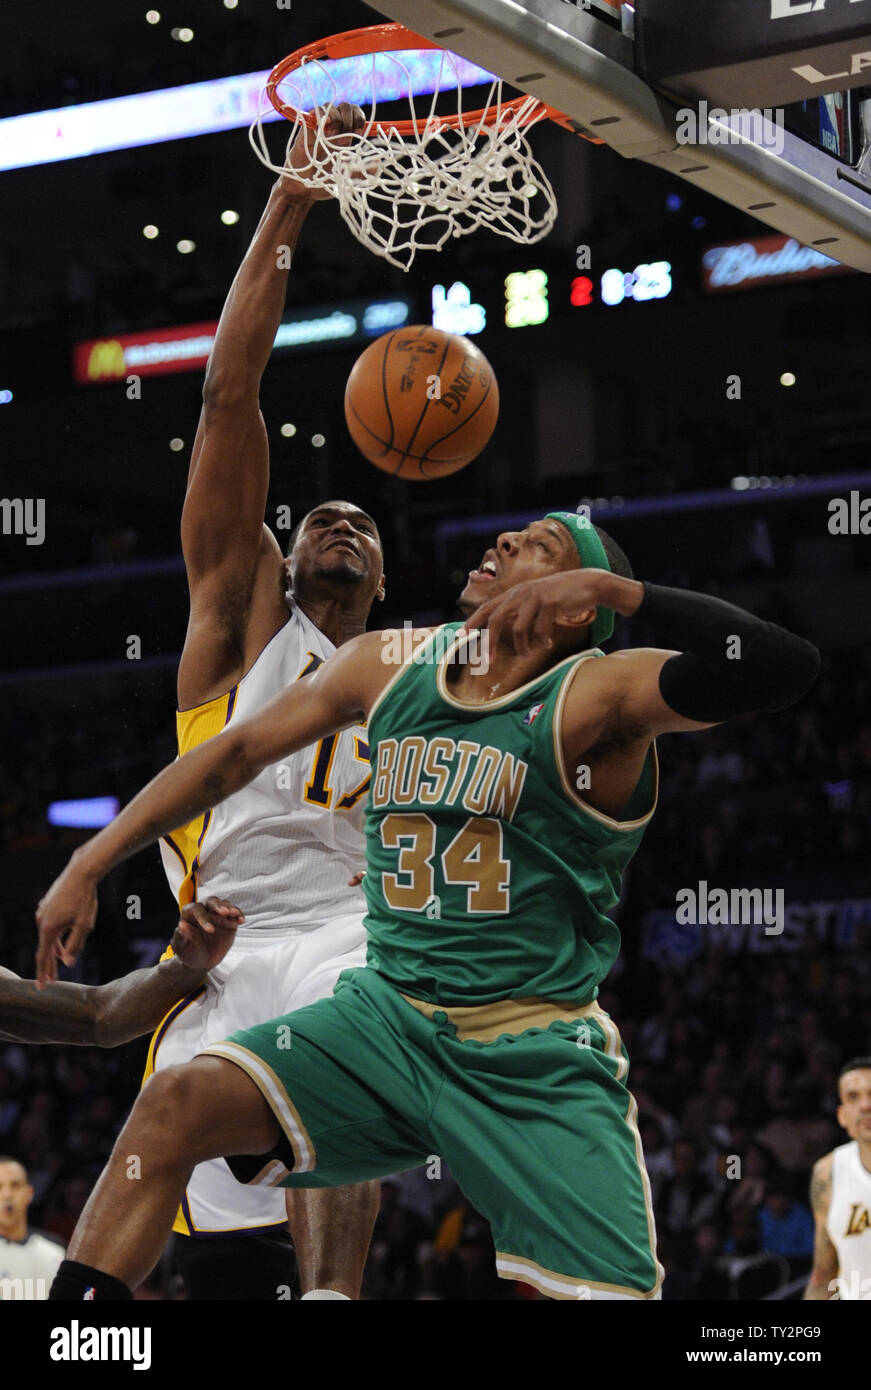 Los Angeles Lakers center Andrew Bynum (17) dunks over Boston Celtics small forward Paul Pierce (34) in the first half of  their NBA basketball game in Los Angeles on March 11, 2012.   UPI/Lori Shepler Stock Photo